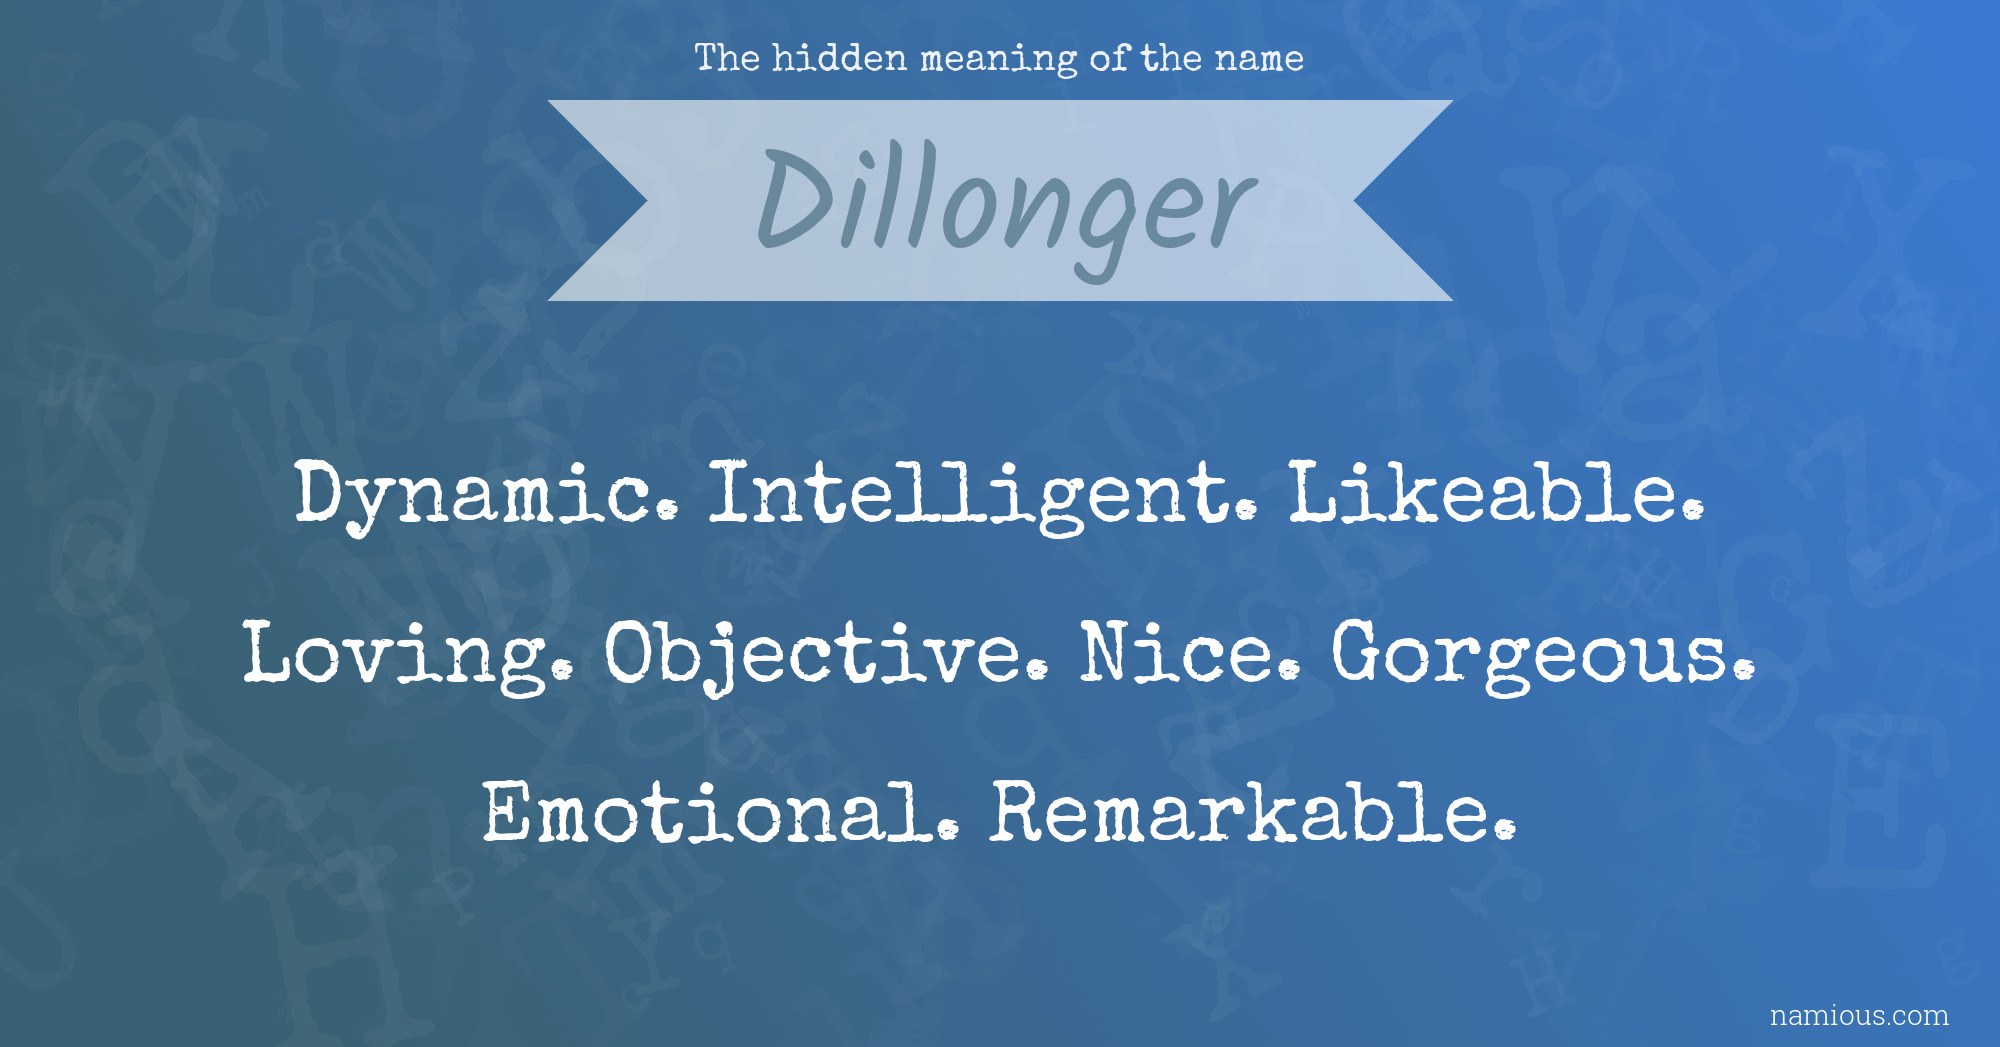 The hidden meaning of the name Dillonger